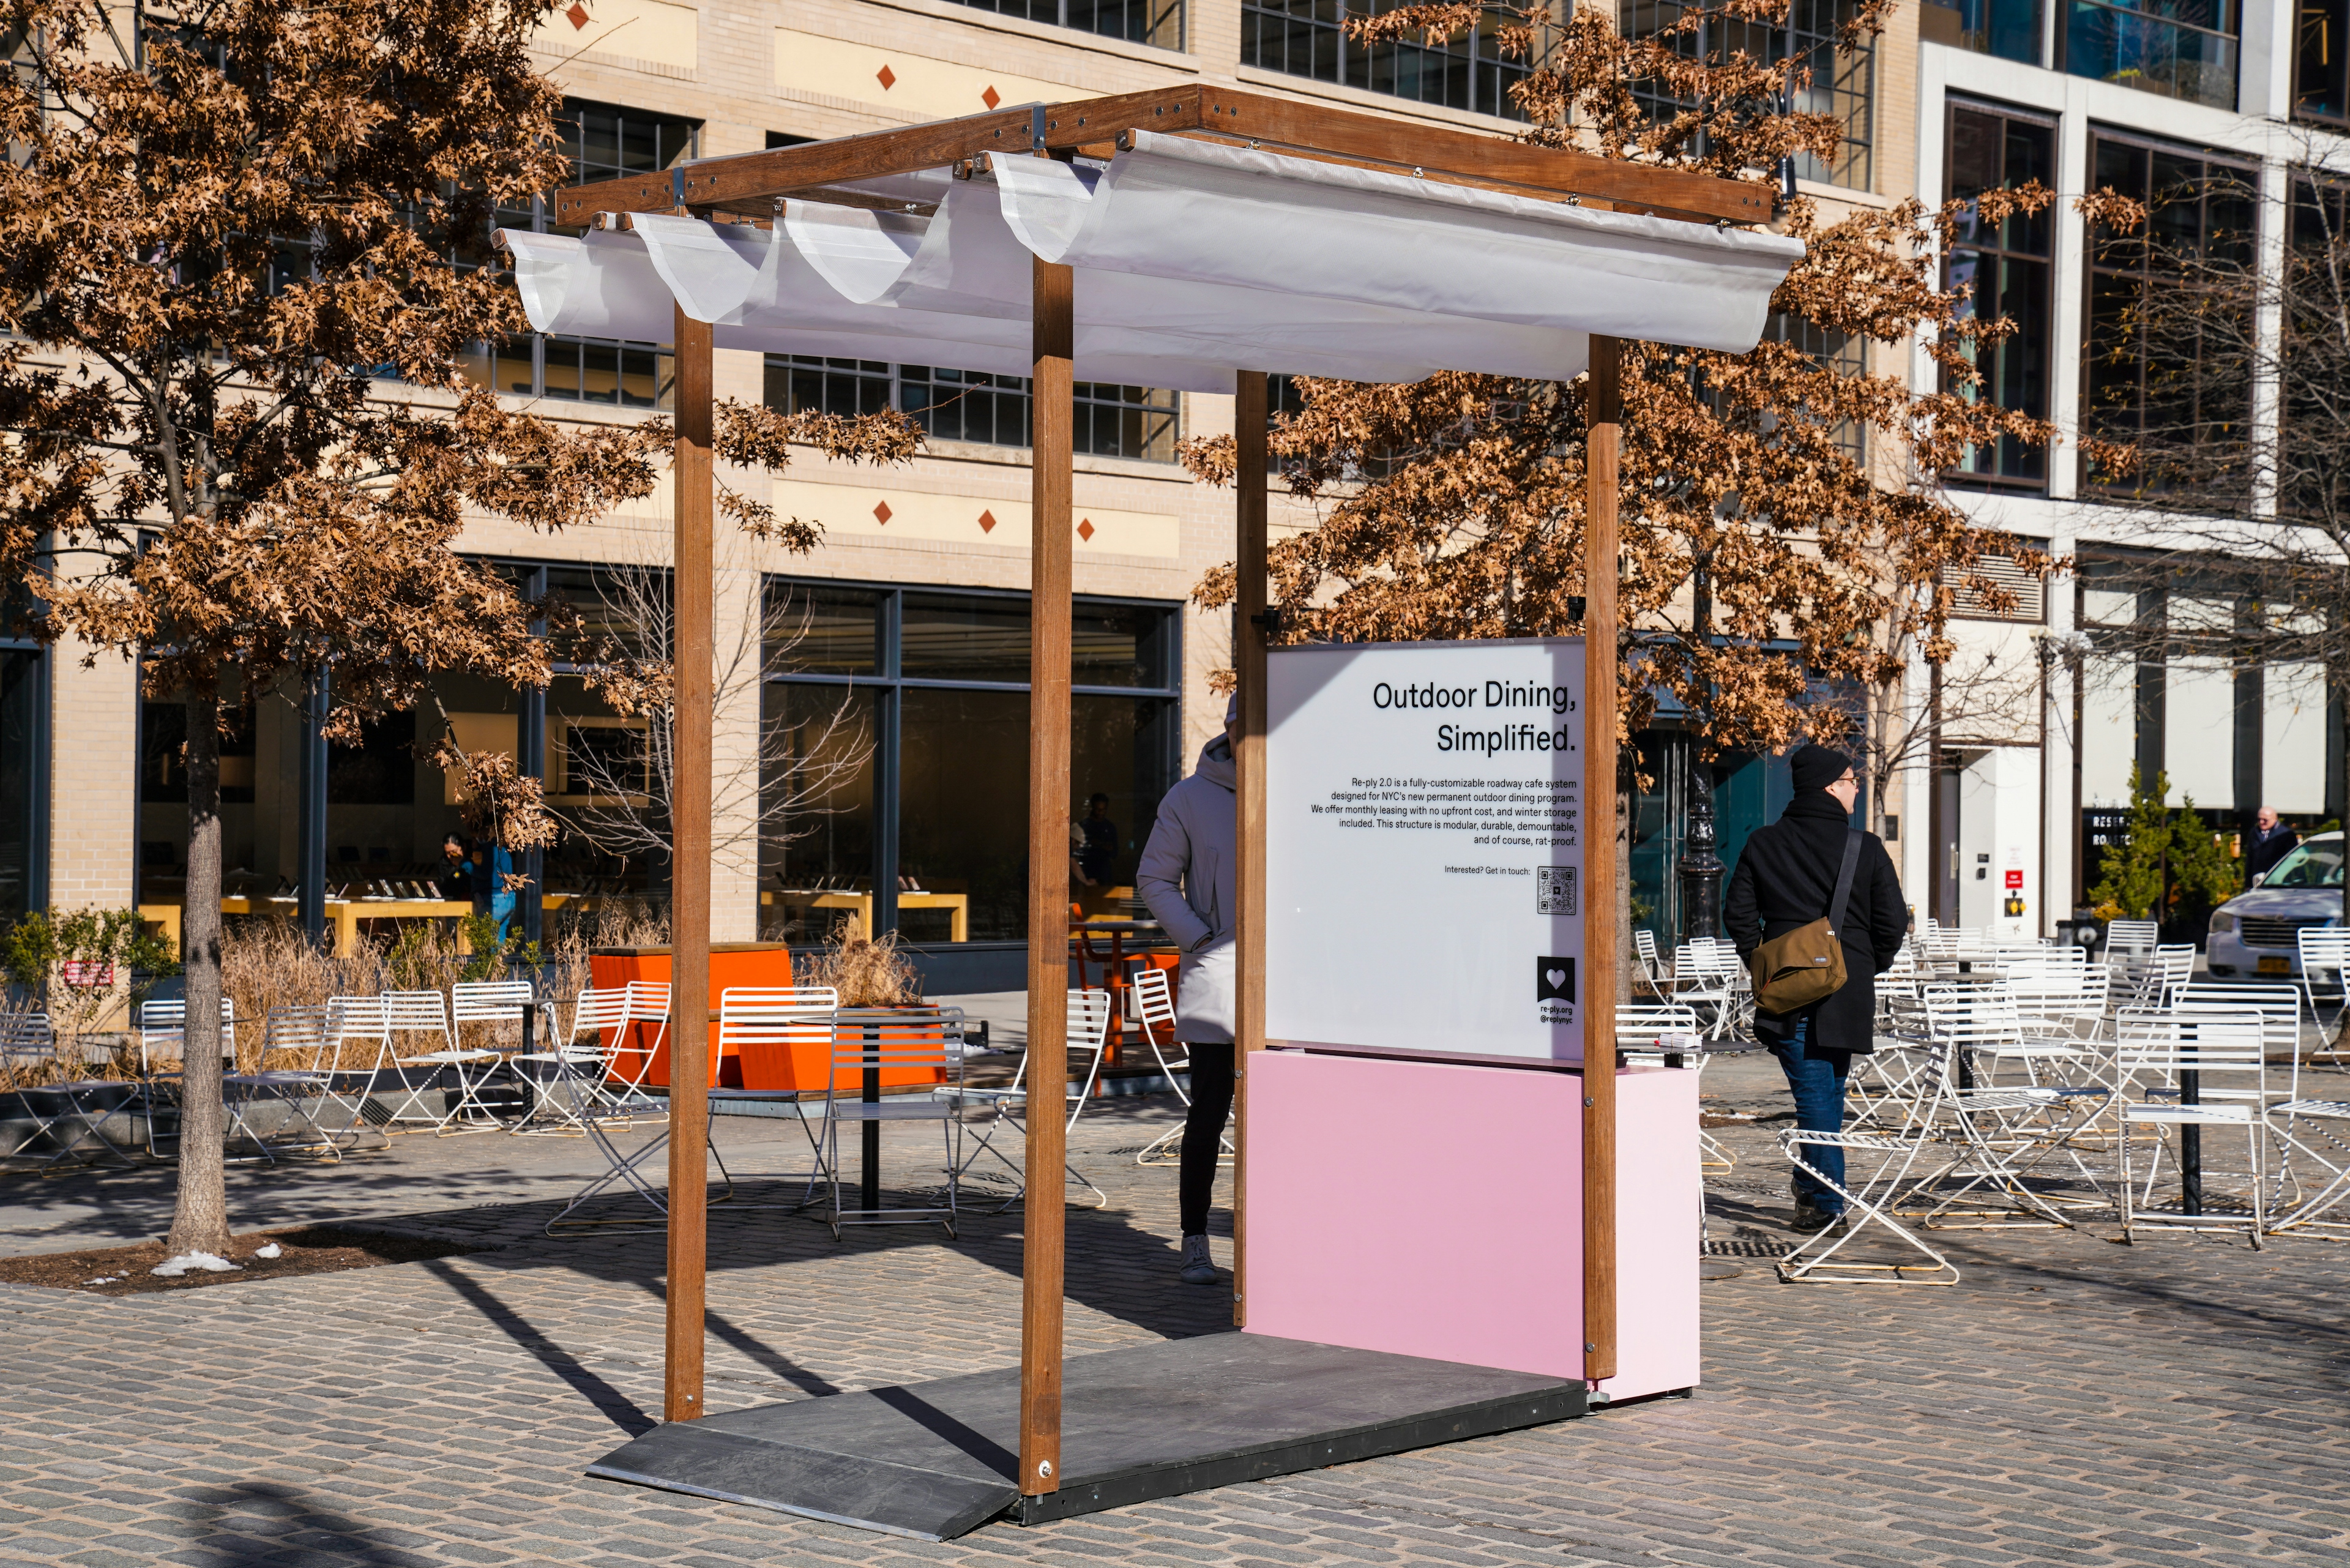 Re-ply outdoor dining structure pop-up in Meatpacking